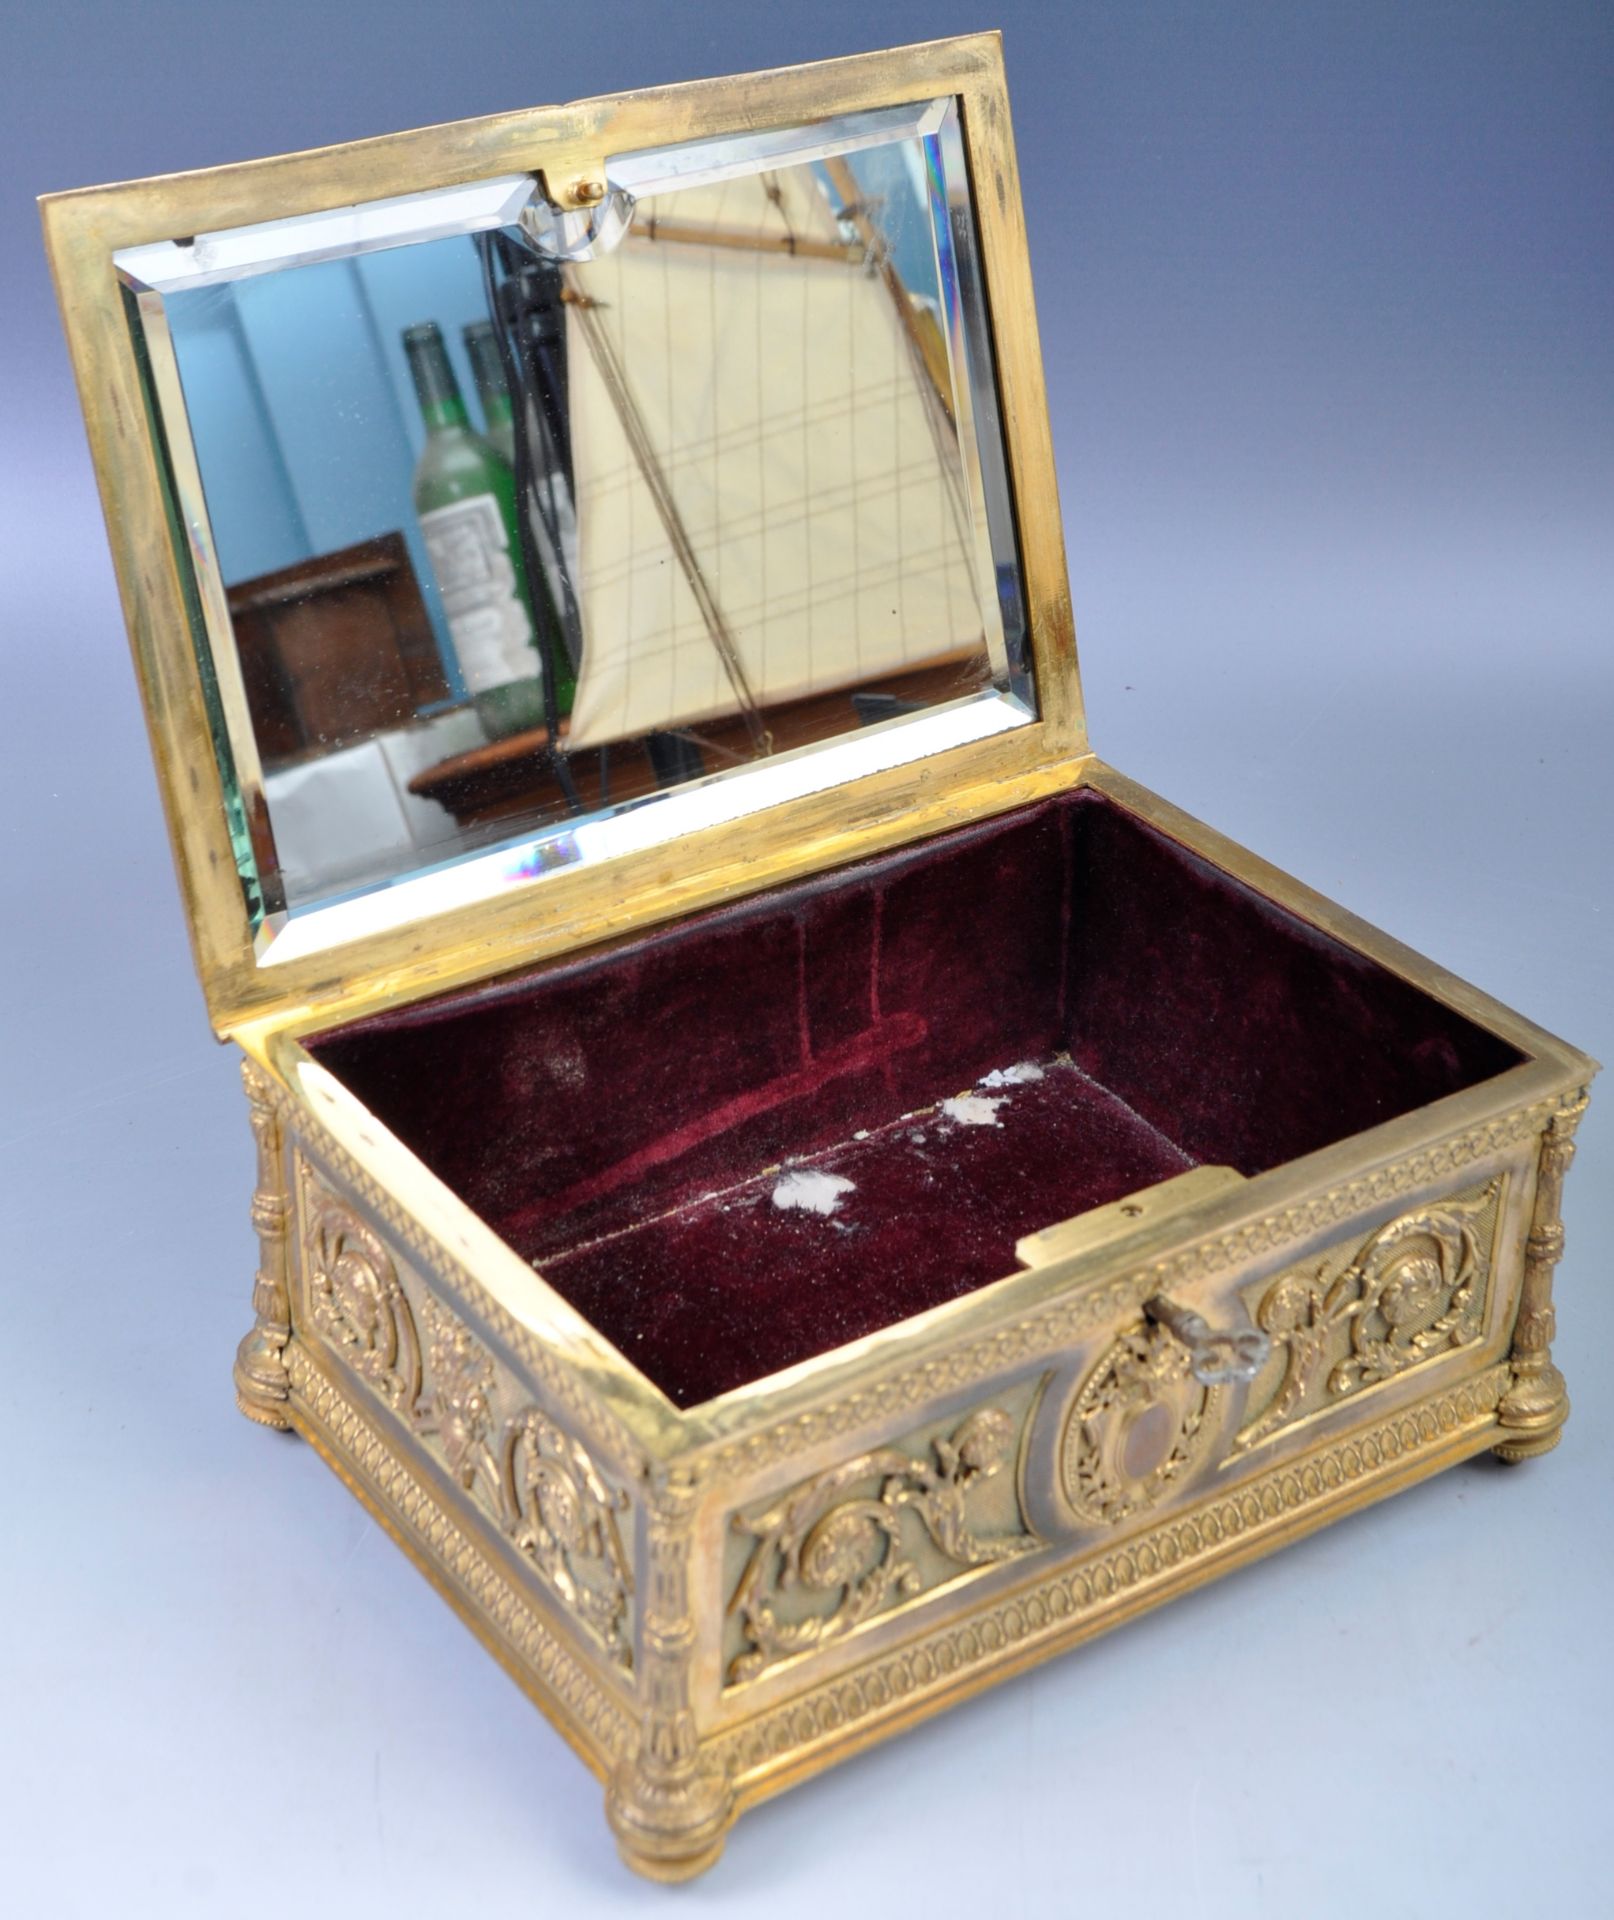 19TH CENTURY FRENCH PALAIS ROYALE GILDED ORMOLU CASKET - Image 3 of 6